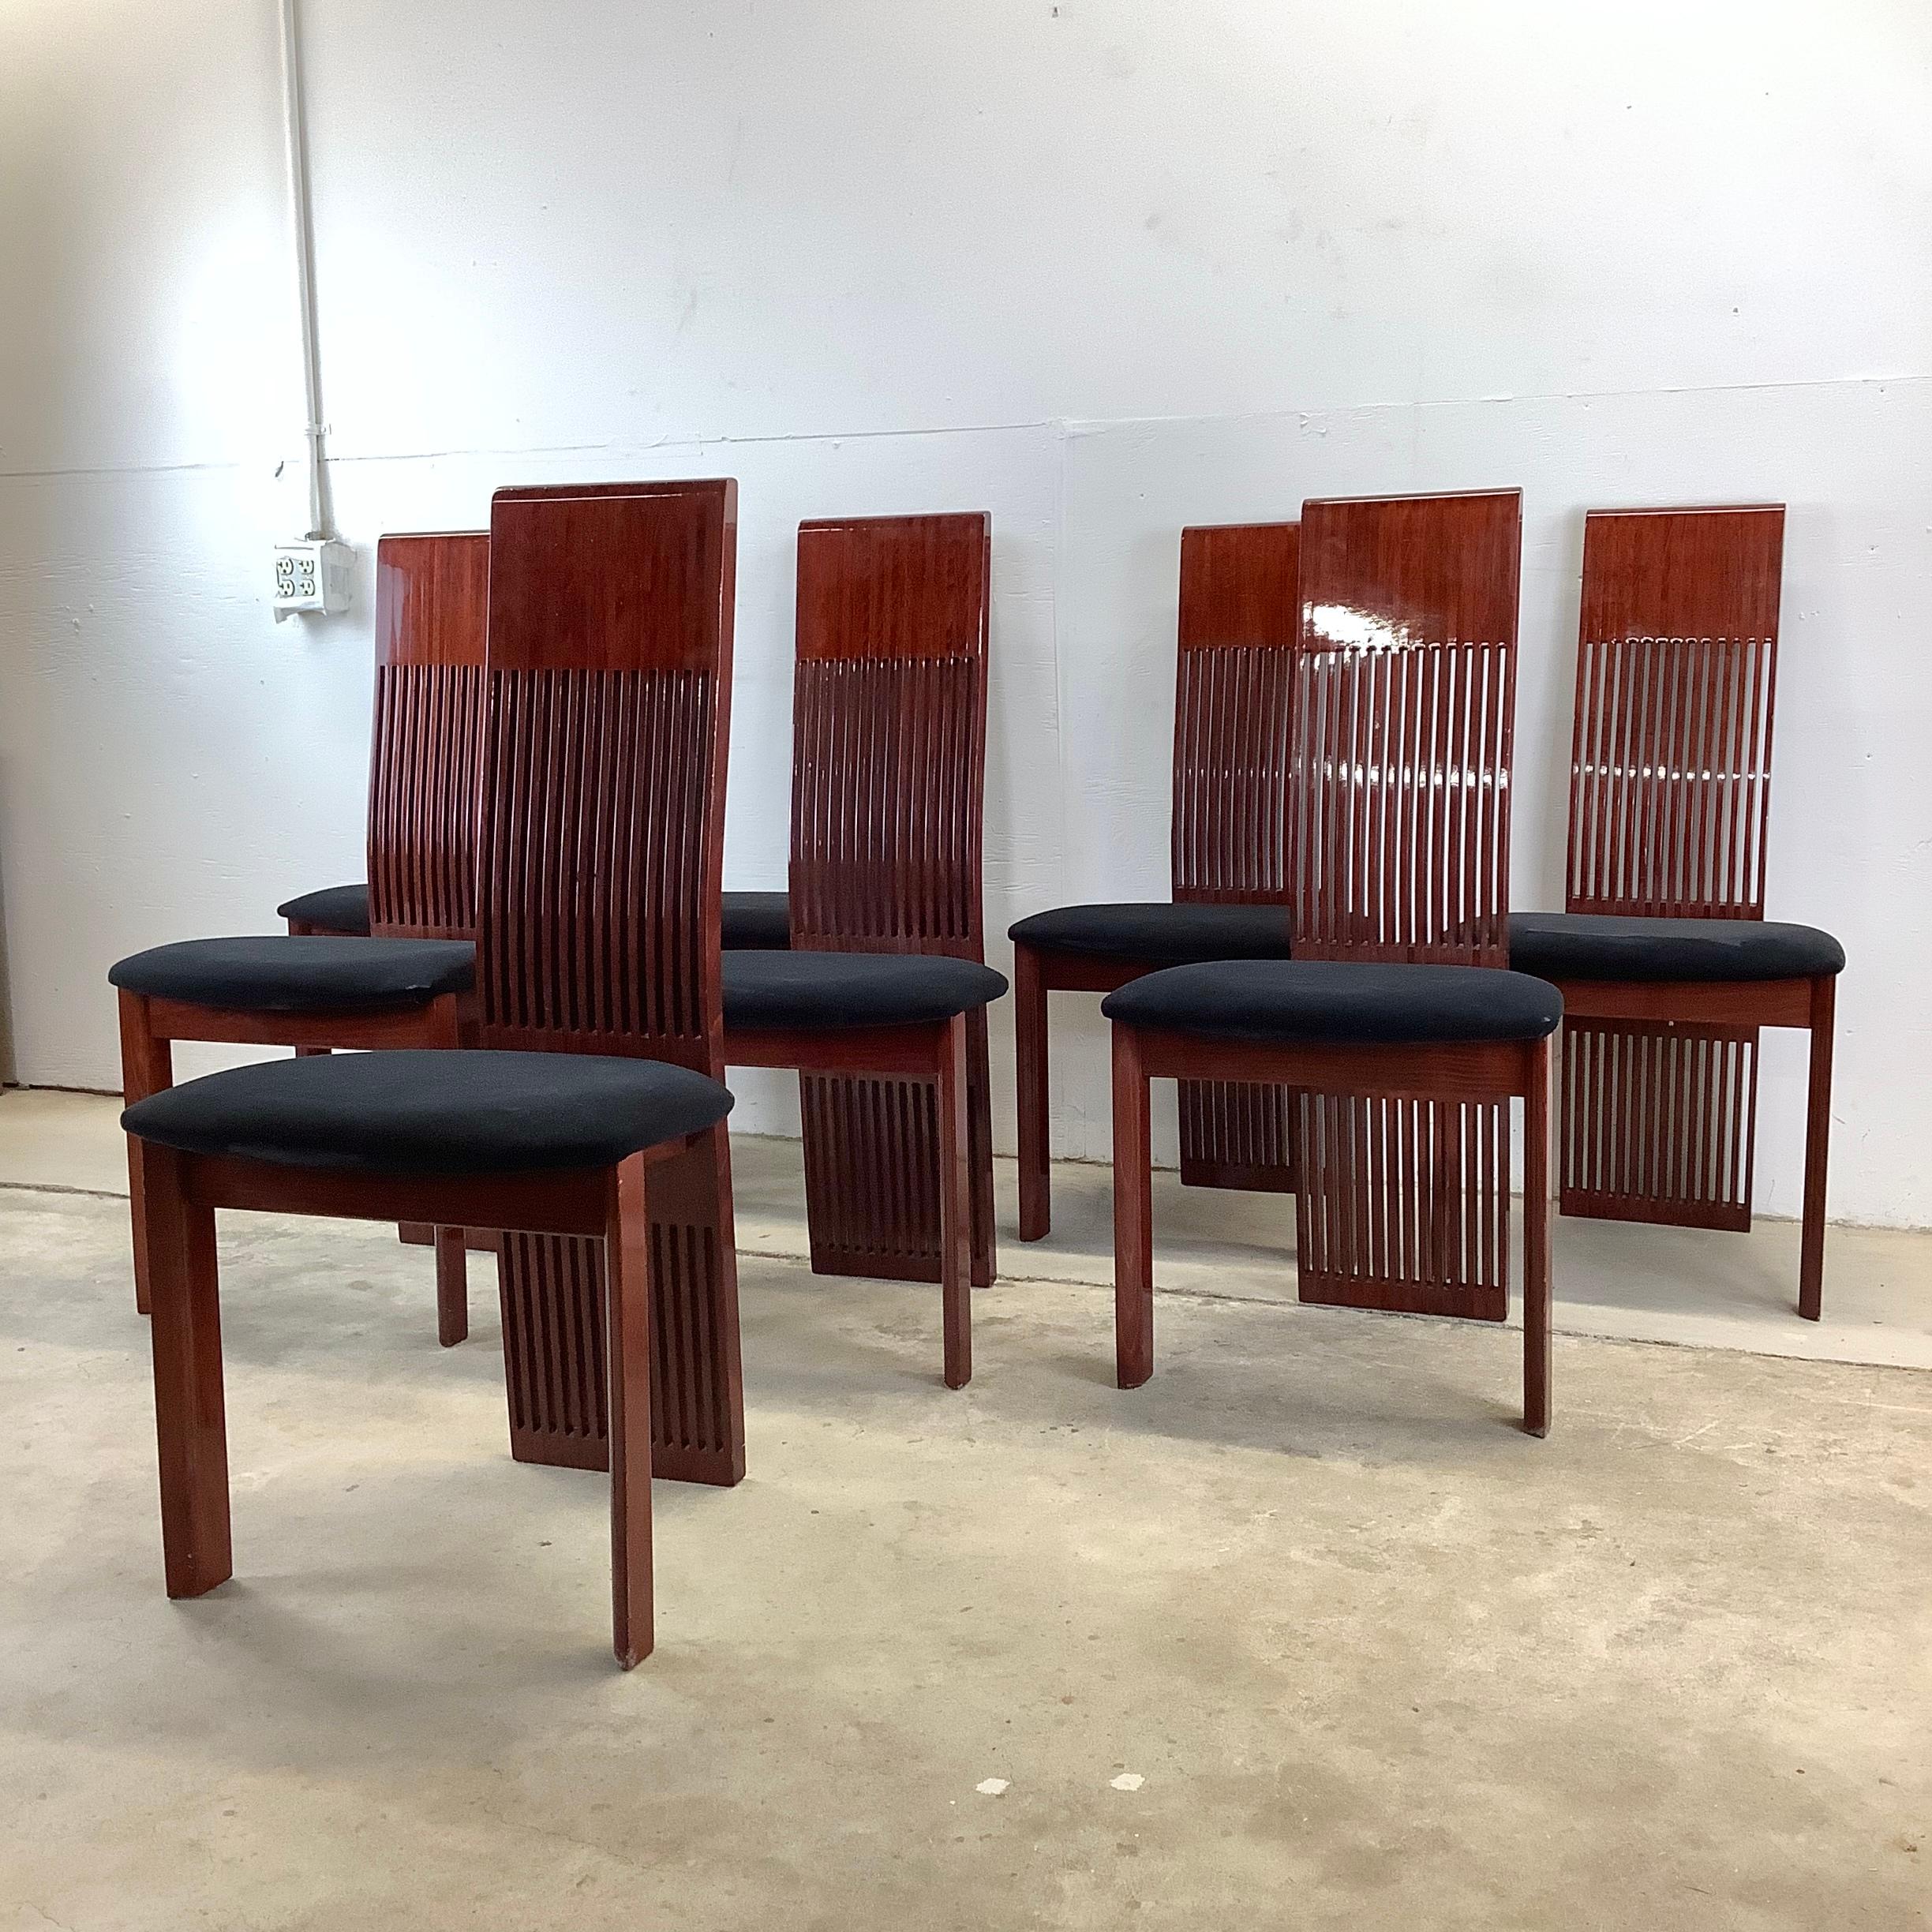 Unknown 20th Century Italian Modern Dining Chairs- set of 8